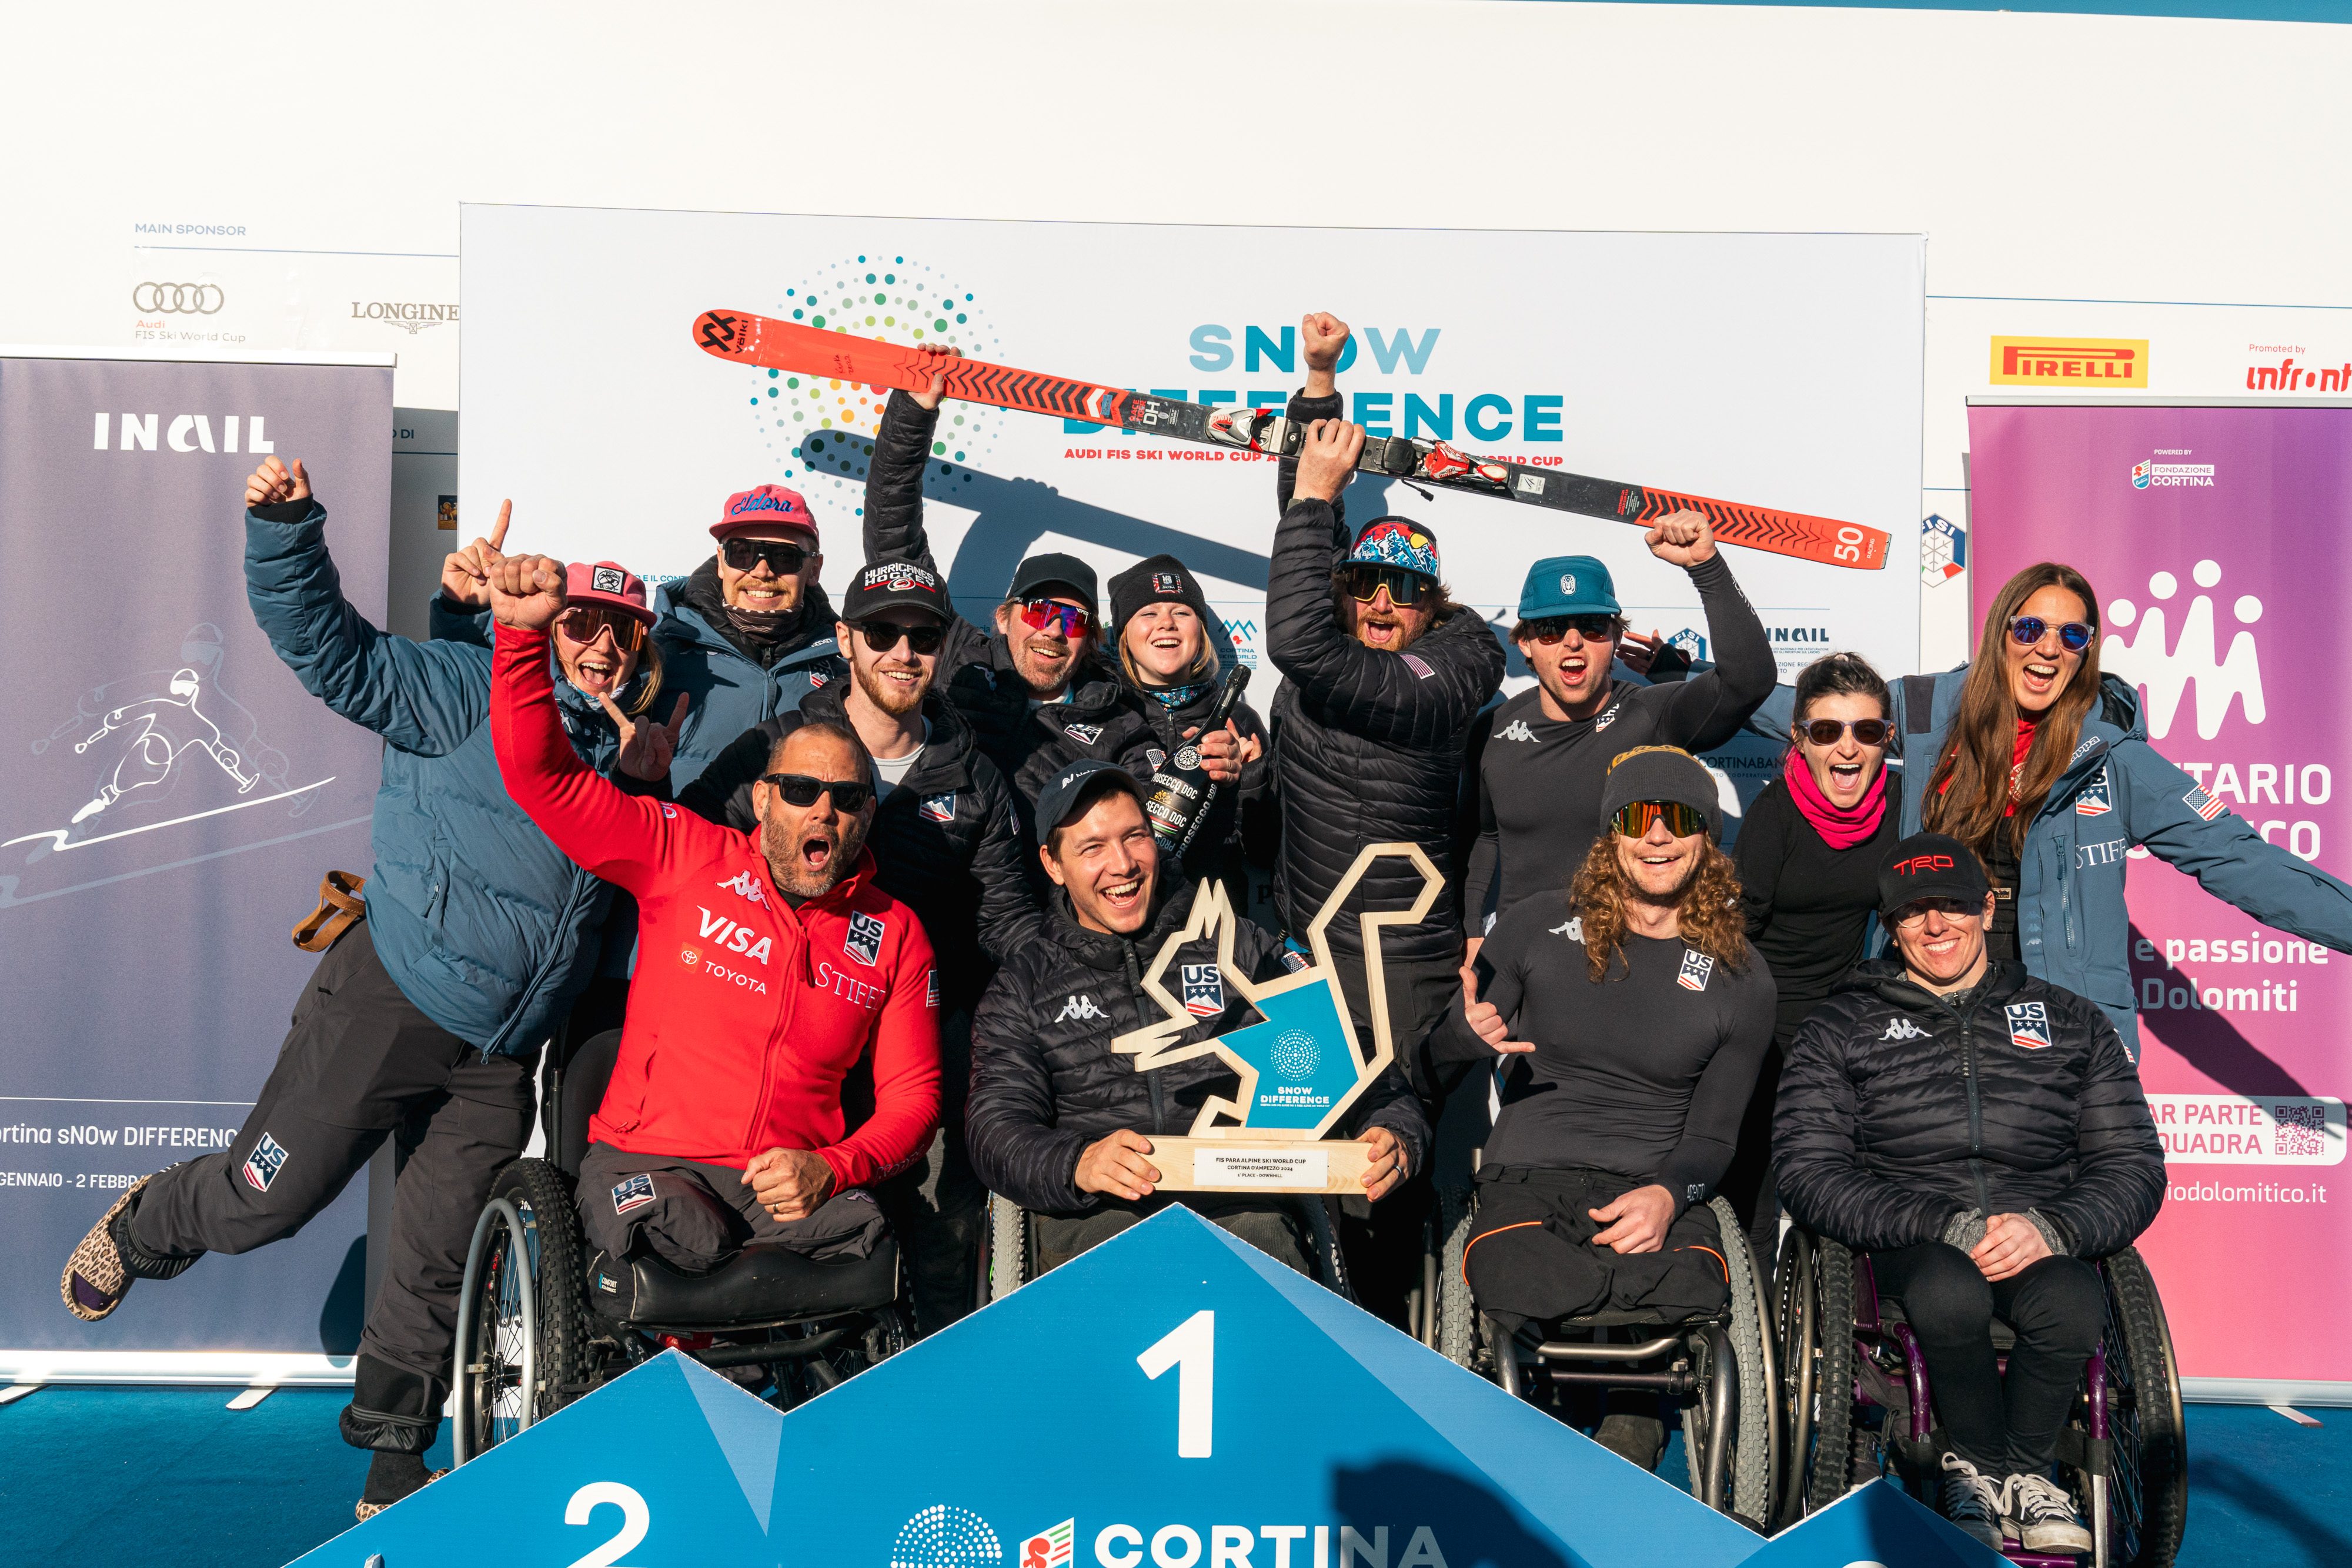 A group photo of the team on the podium in Cortina following Andrew Kurka's downhill win